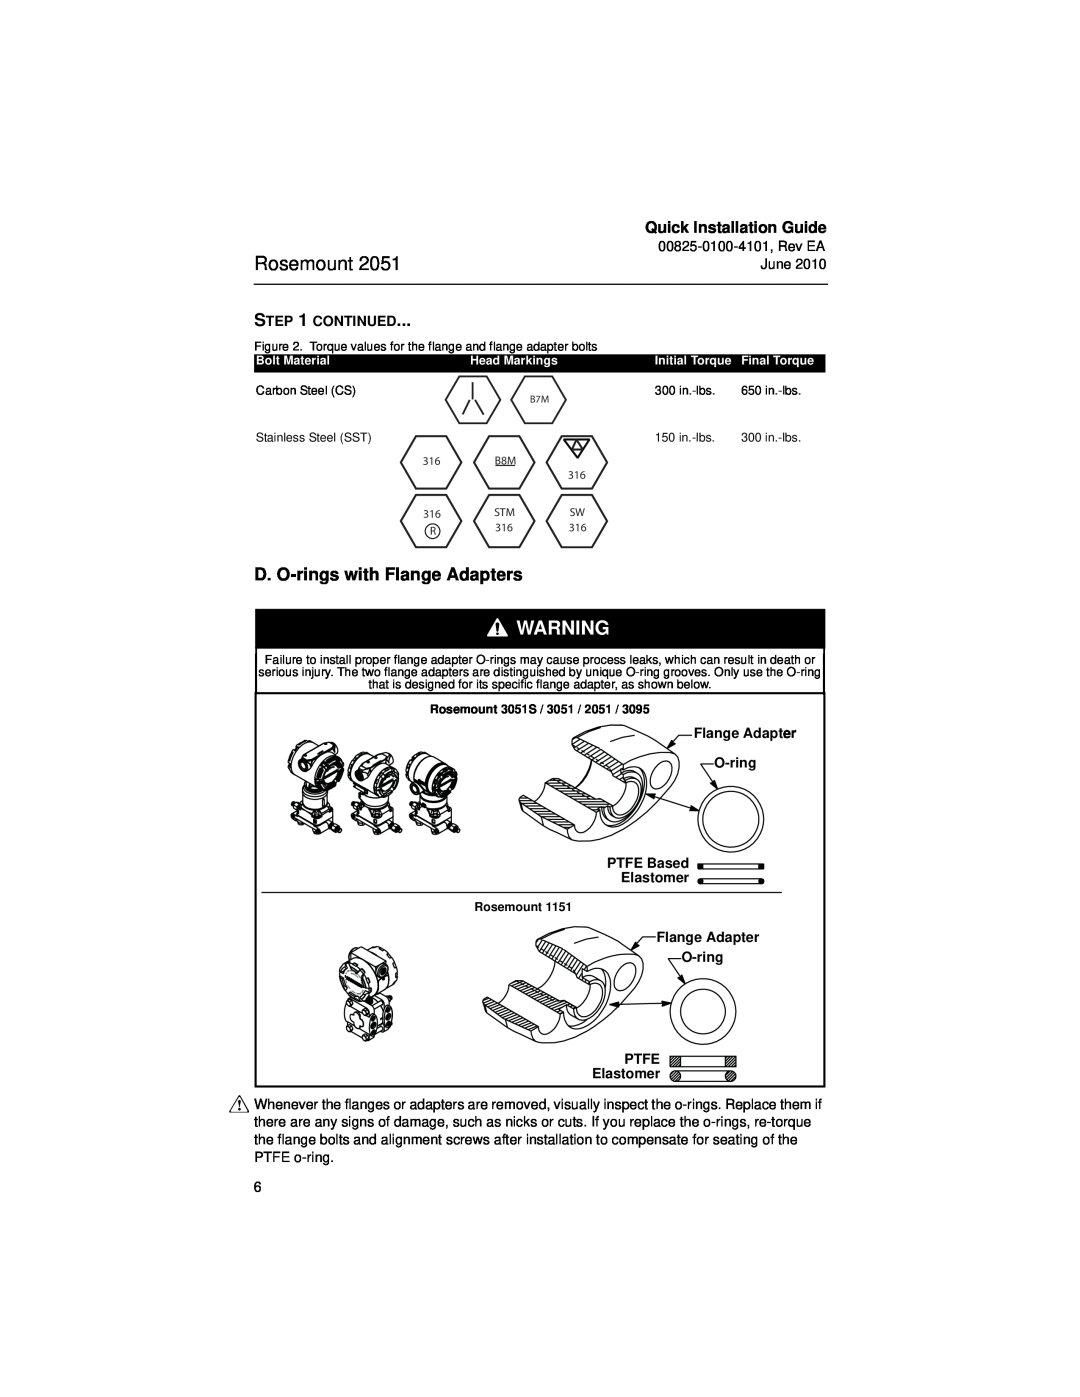 Emerson Process Management 2051CF Rosemount, D. O-ringswith Flange Adapters, Quick Installation Guide, Continued, Ptfe 